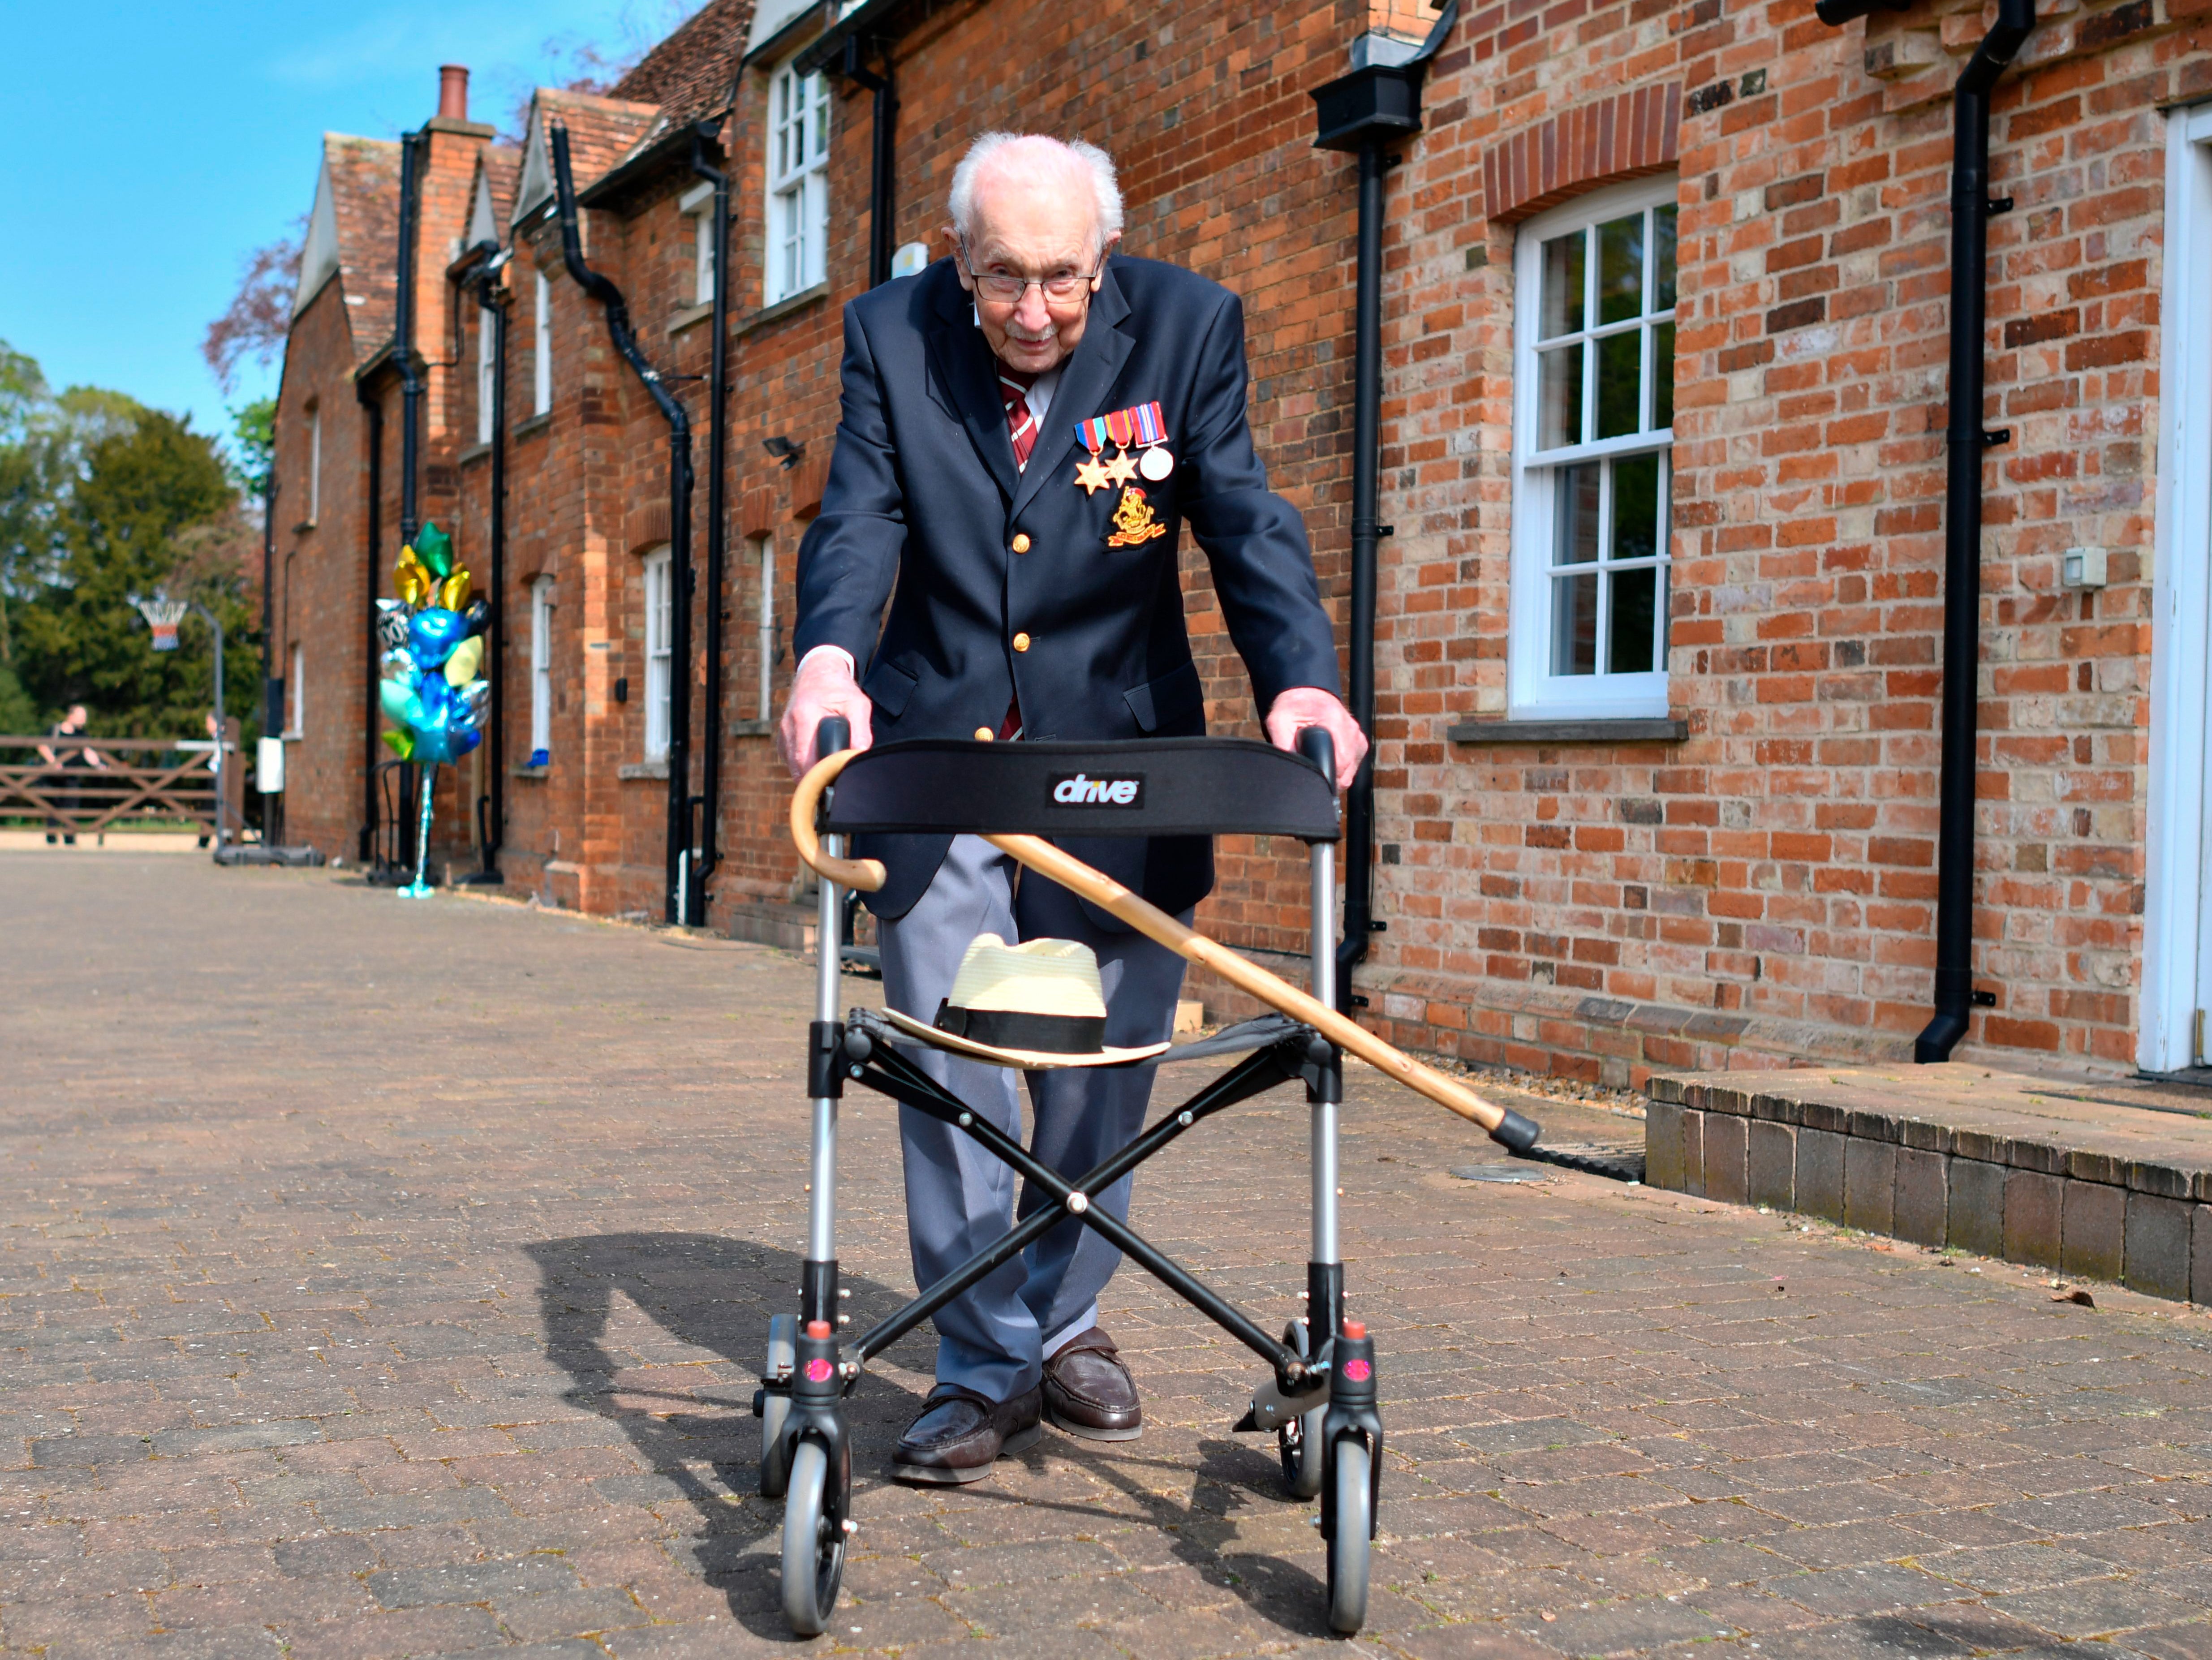 Captain Tom with his walking frame doing a lap of his garden in the Bedfordshire village of Marston Moretaine inApril 2020